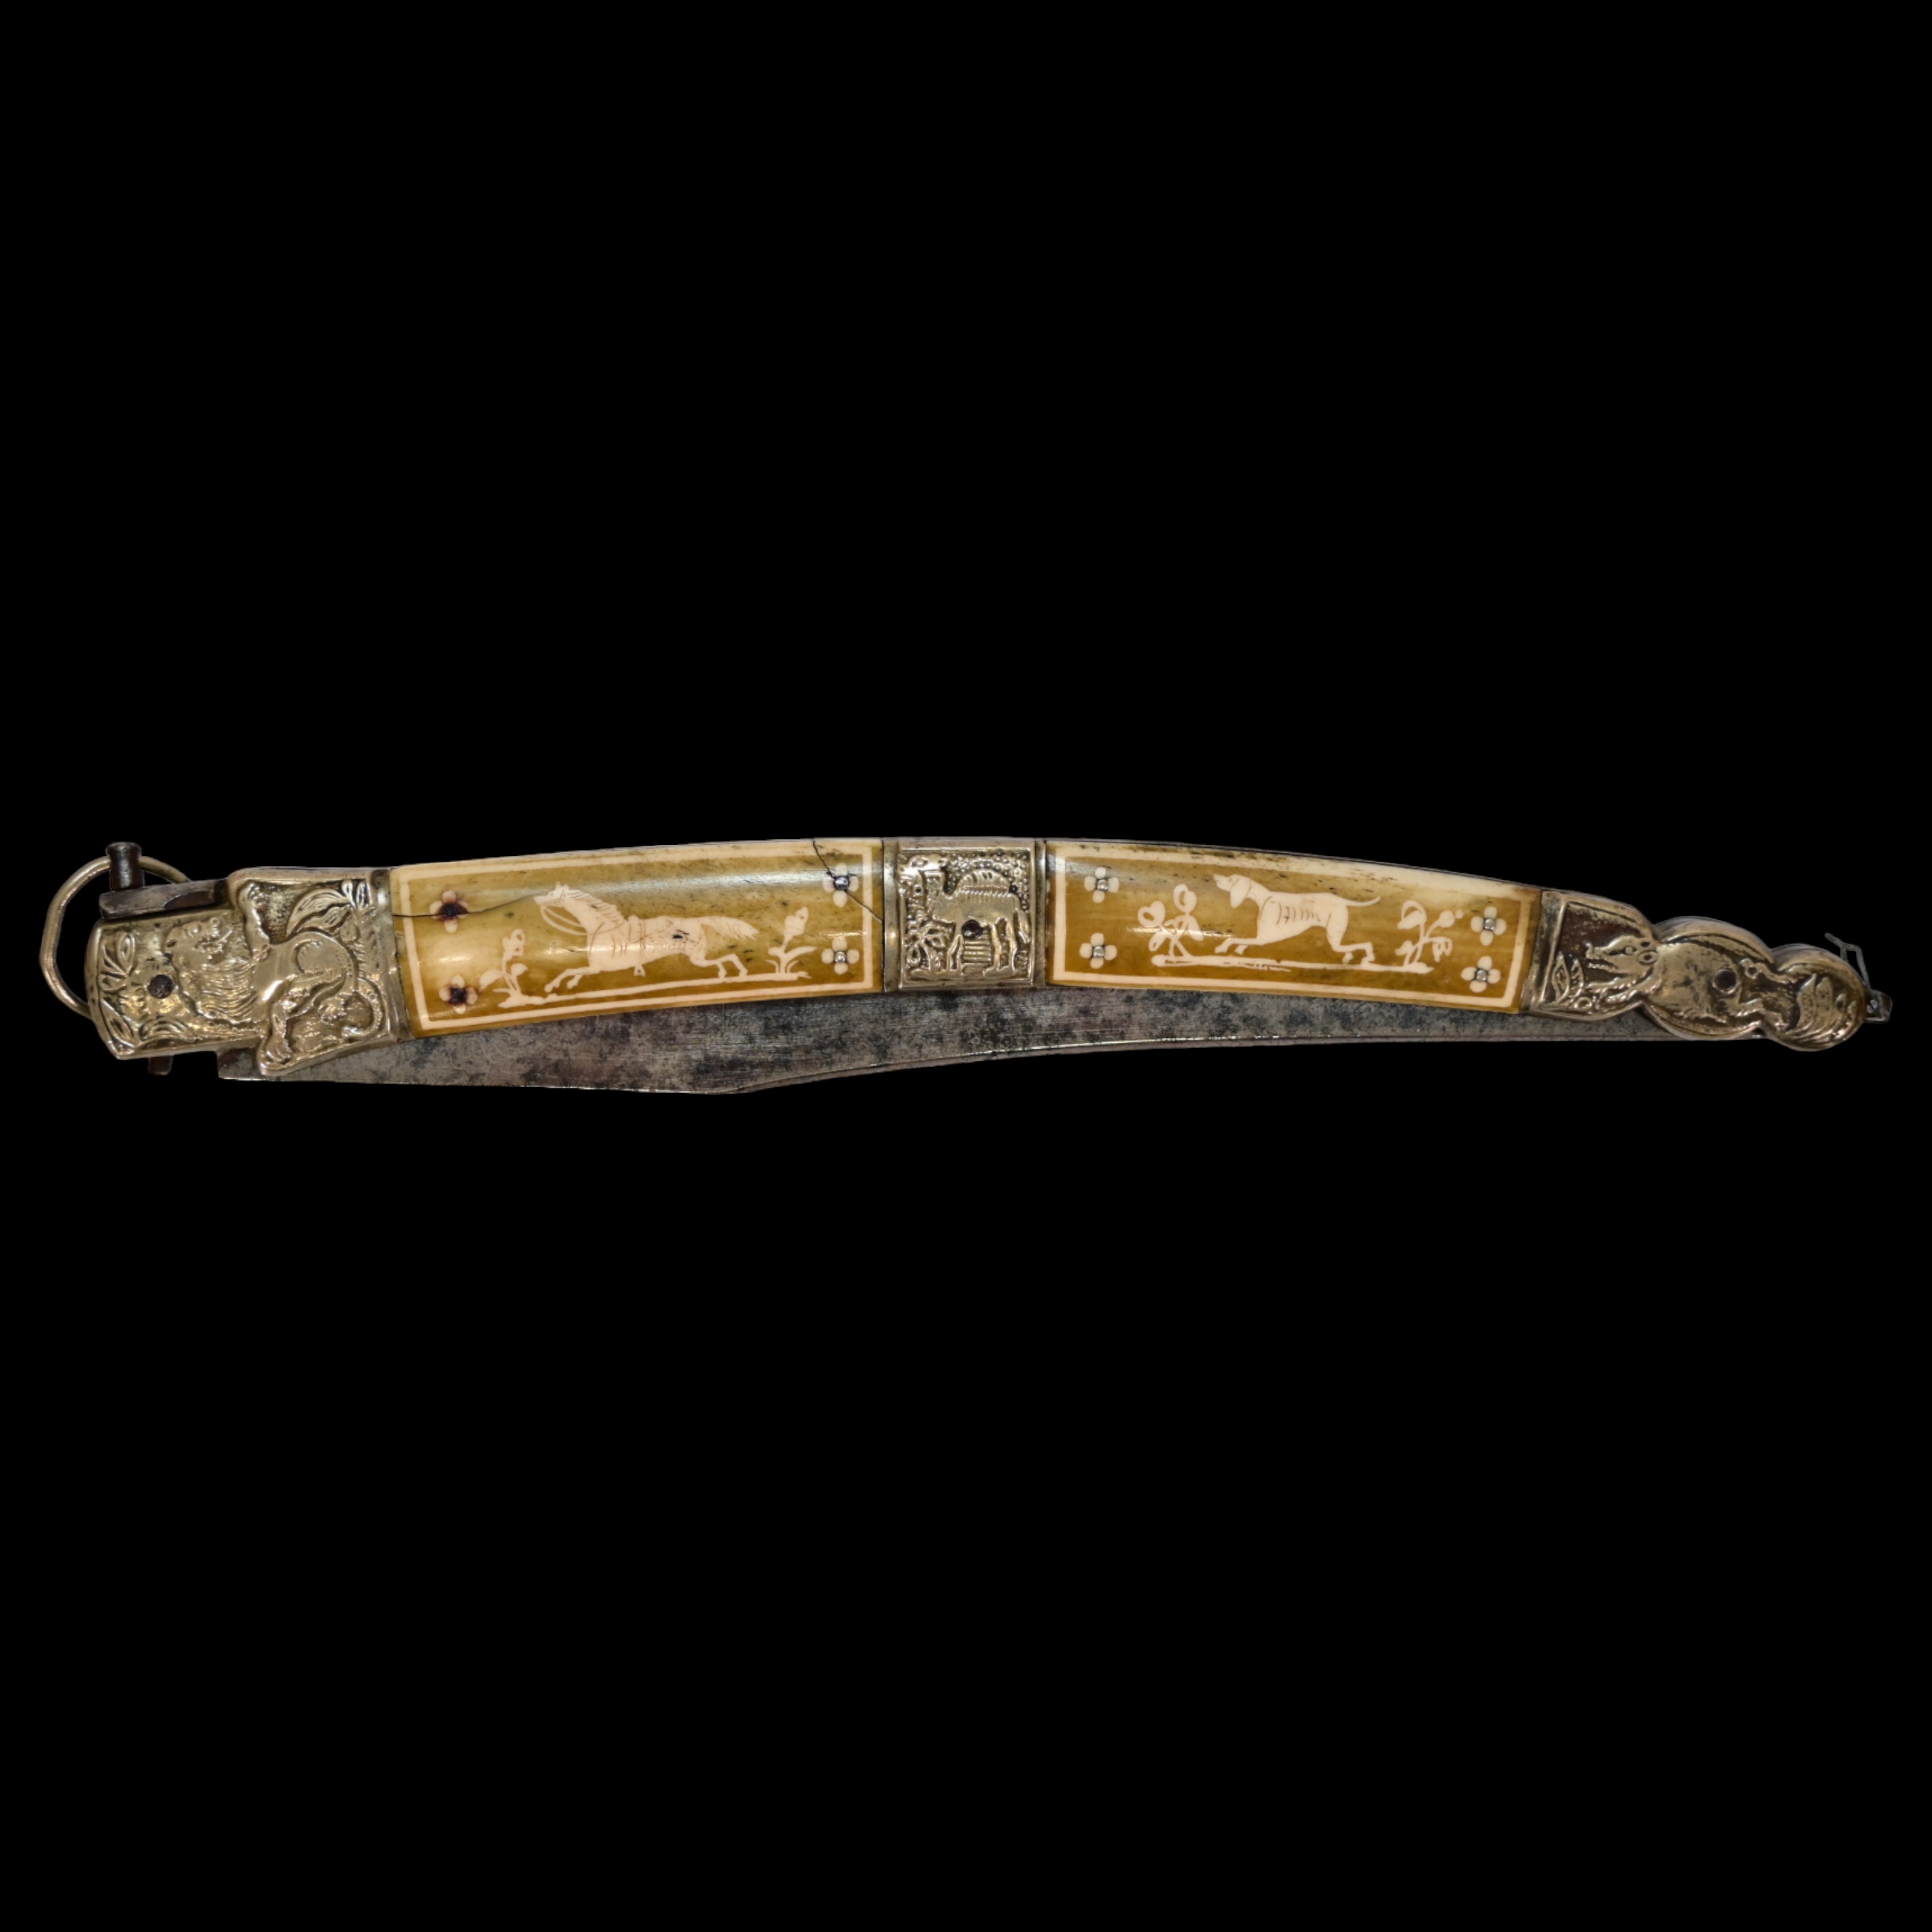 A large Spanish navaja, circa 1900. The steel blade is decorated with etching. - Image 15 of 15